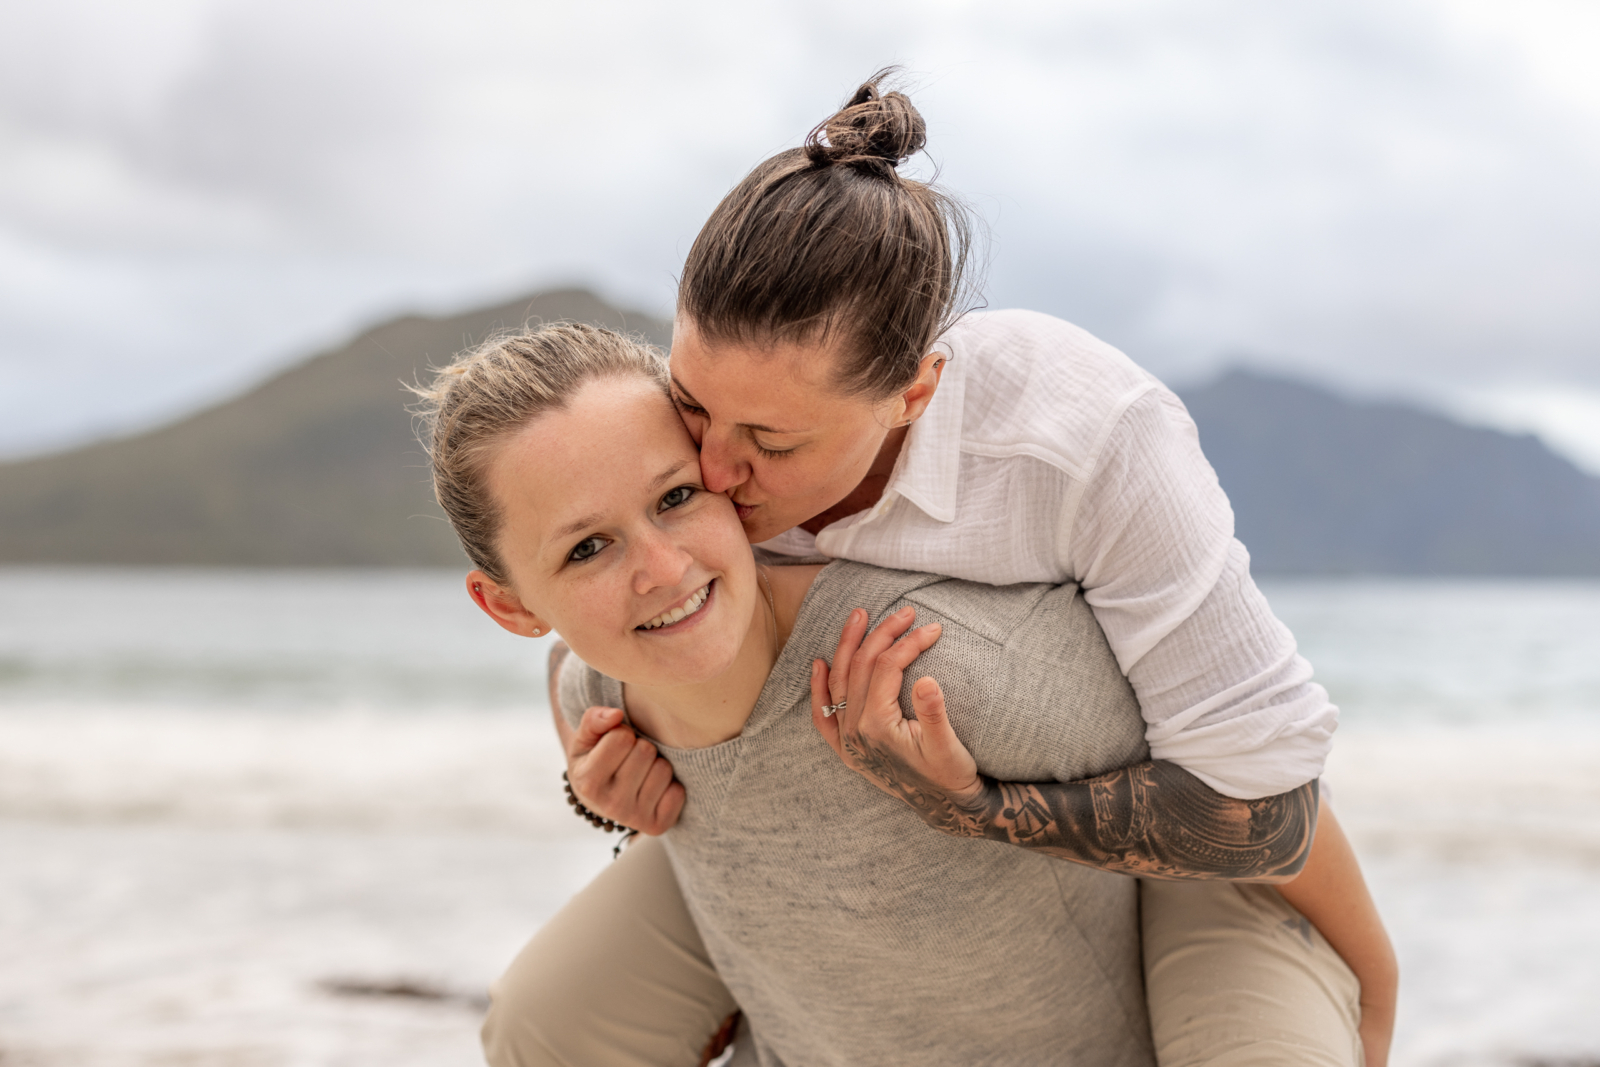 authentic LGBTQ engagement photos at the beach on the Lofoten Islands in Norway